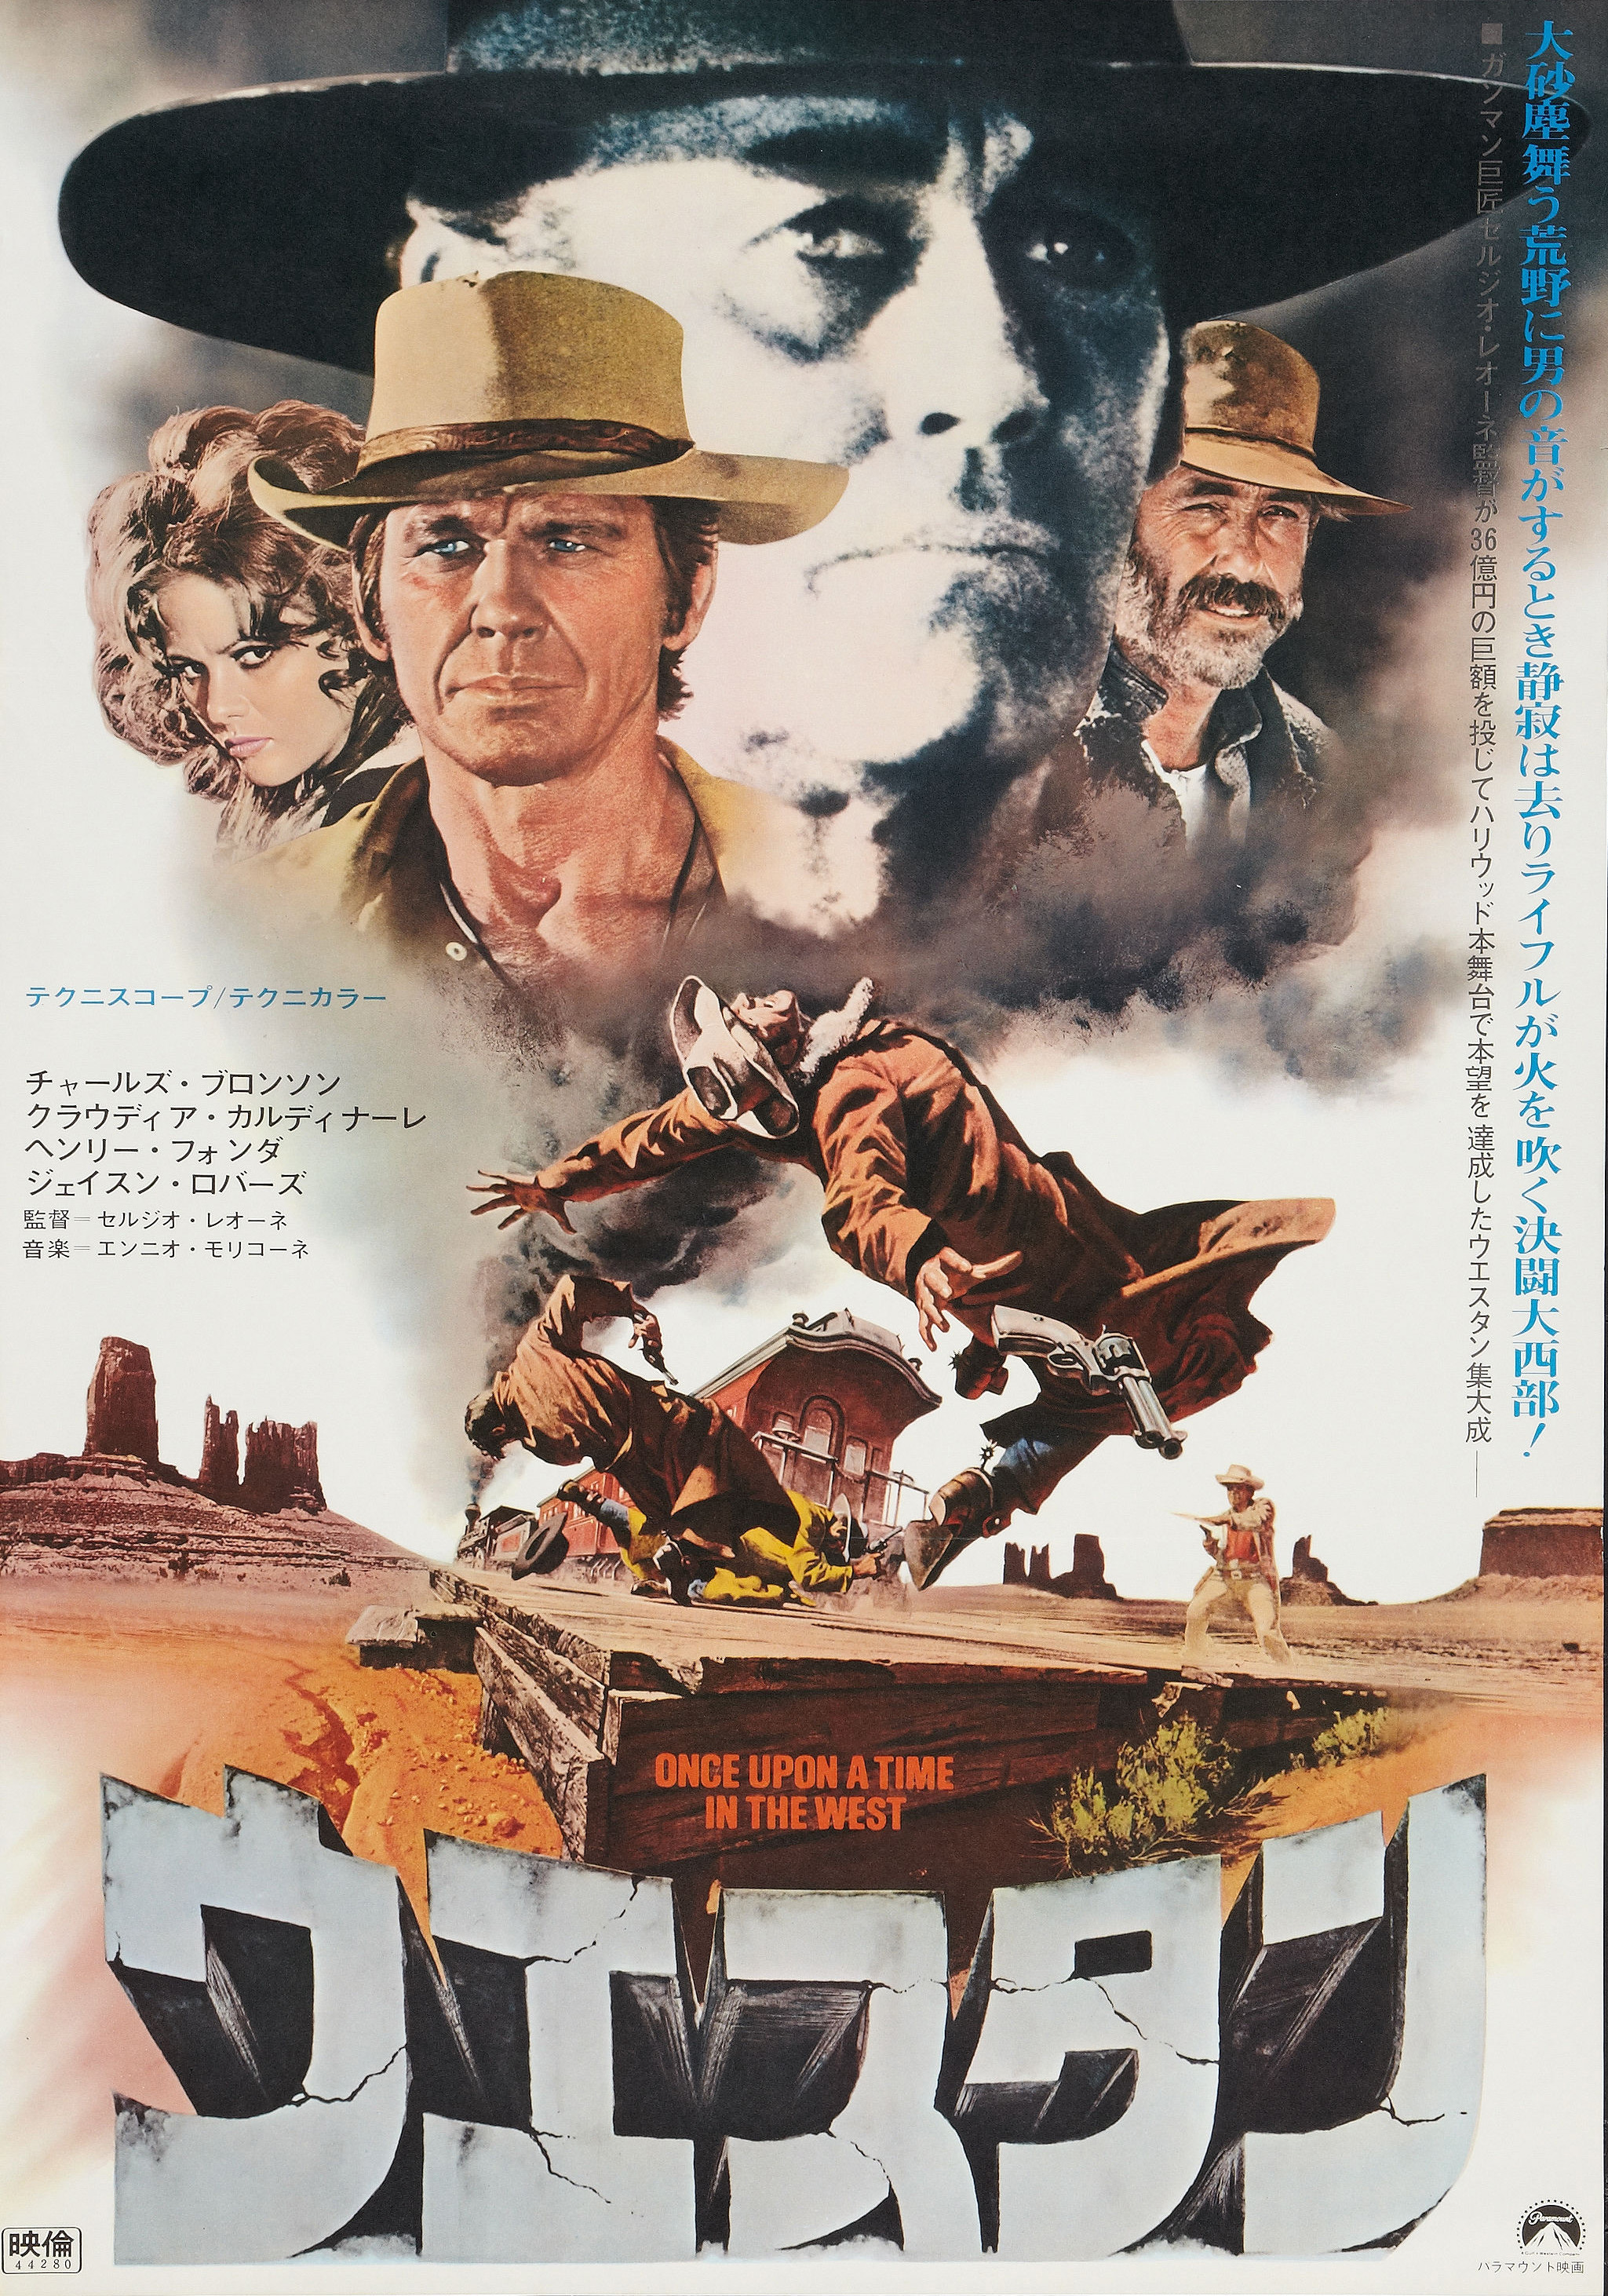 Mega Sized Movie Poster Image for Once Upon a Time in the West (#2 of 3)